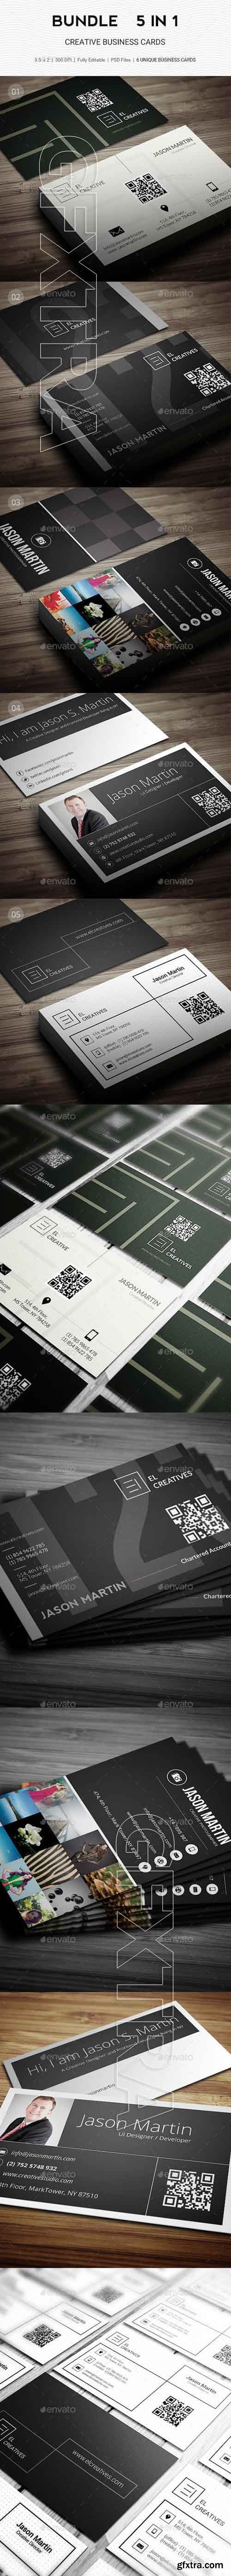 GraphicRiver - Bundle - 5 in 1- Creative Business Cards - B40 20525141